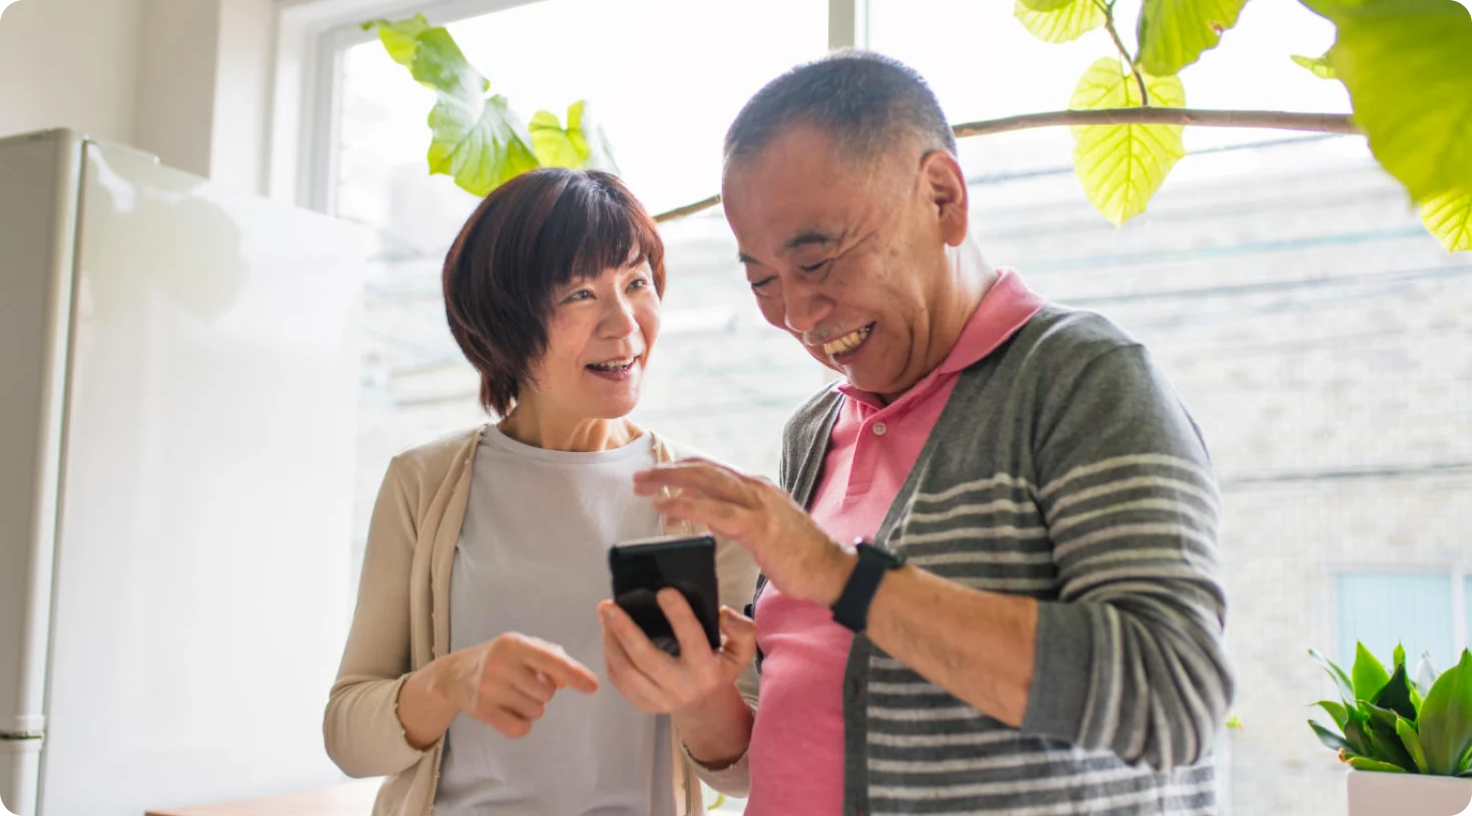 A senior couple sharing a laugh while viewing a smartphone